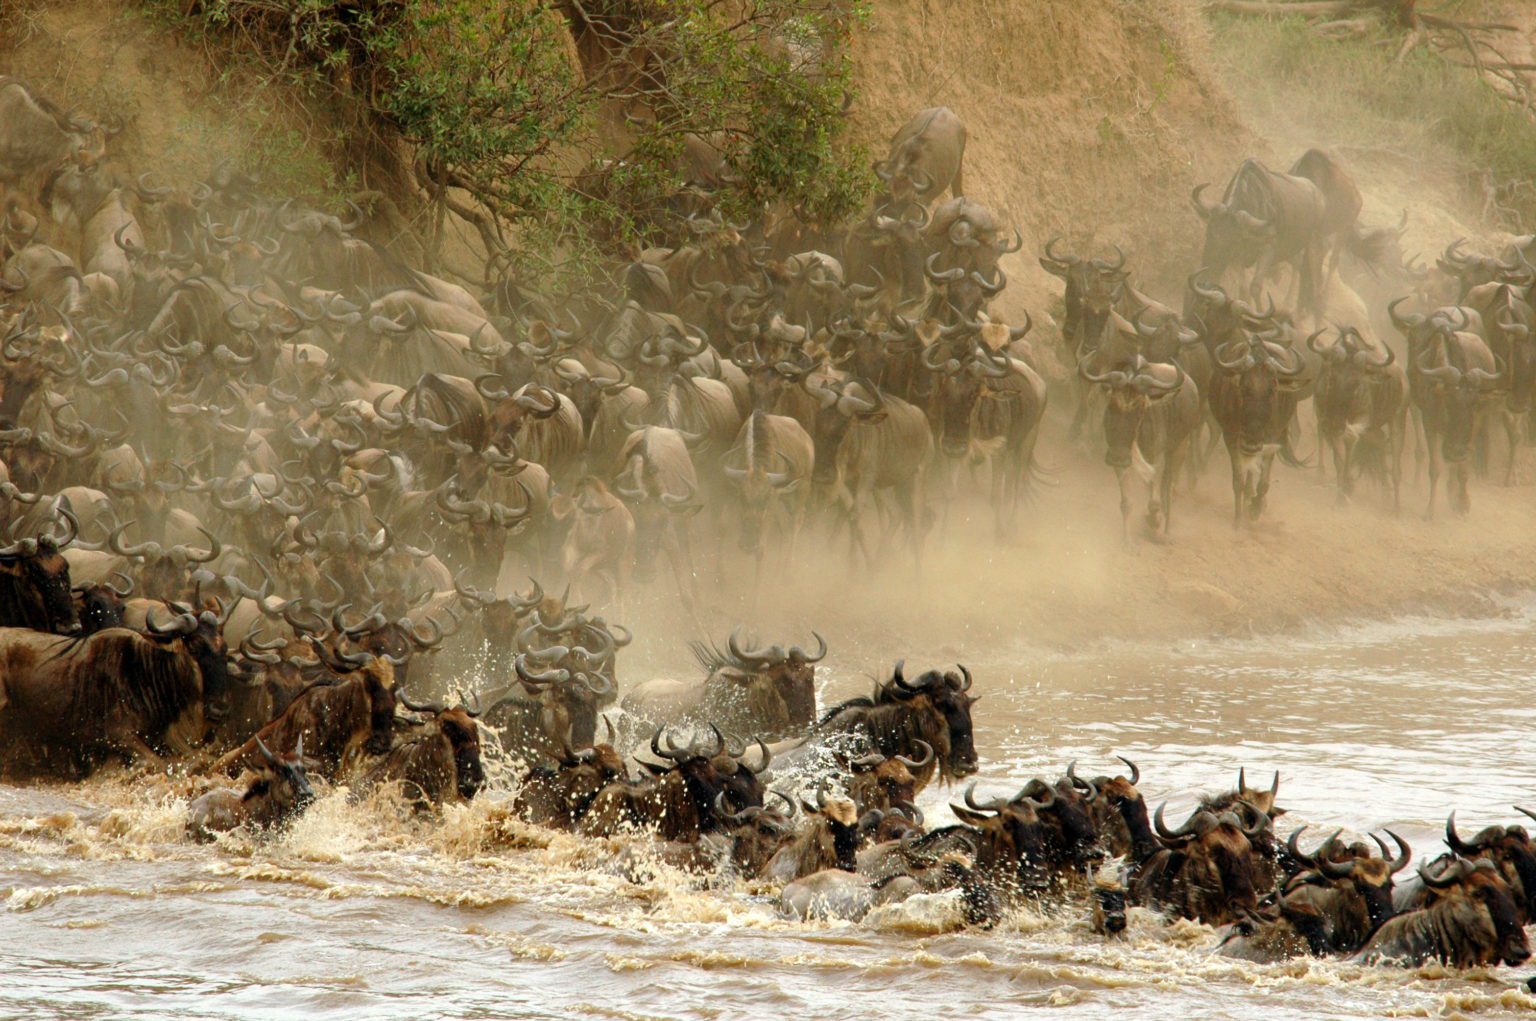 wildebeest migration crossing the river